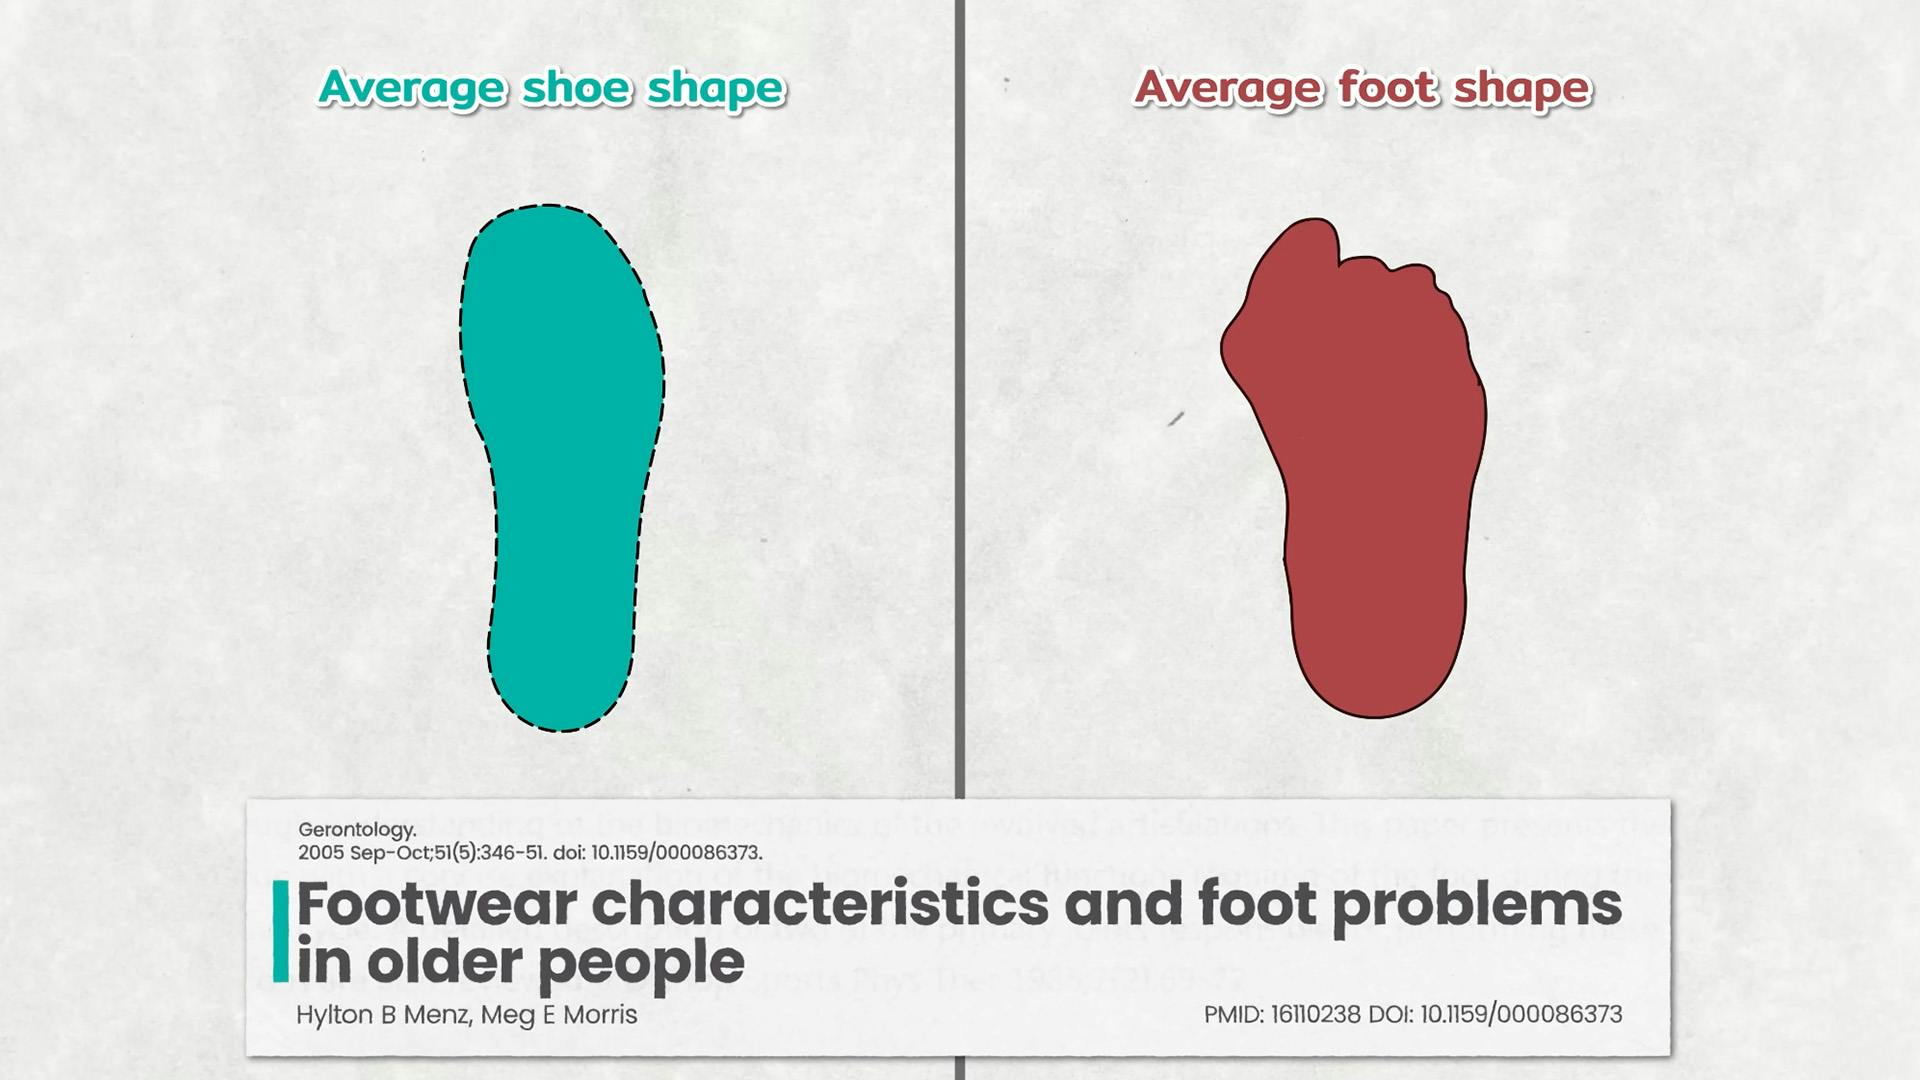 Average Foot Shape Vs Shoe Shape in 62 to 96 Year Olds 